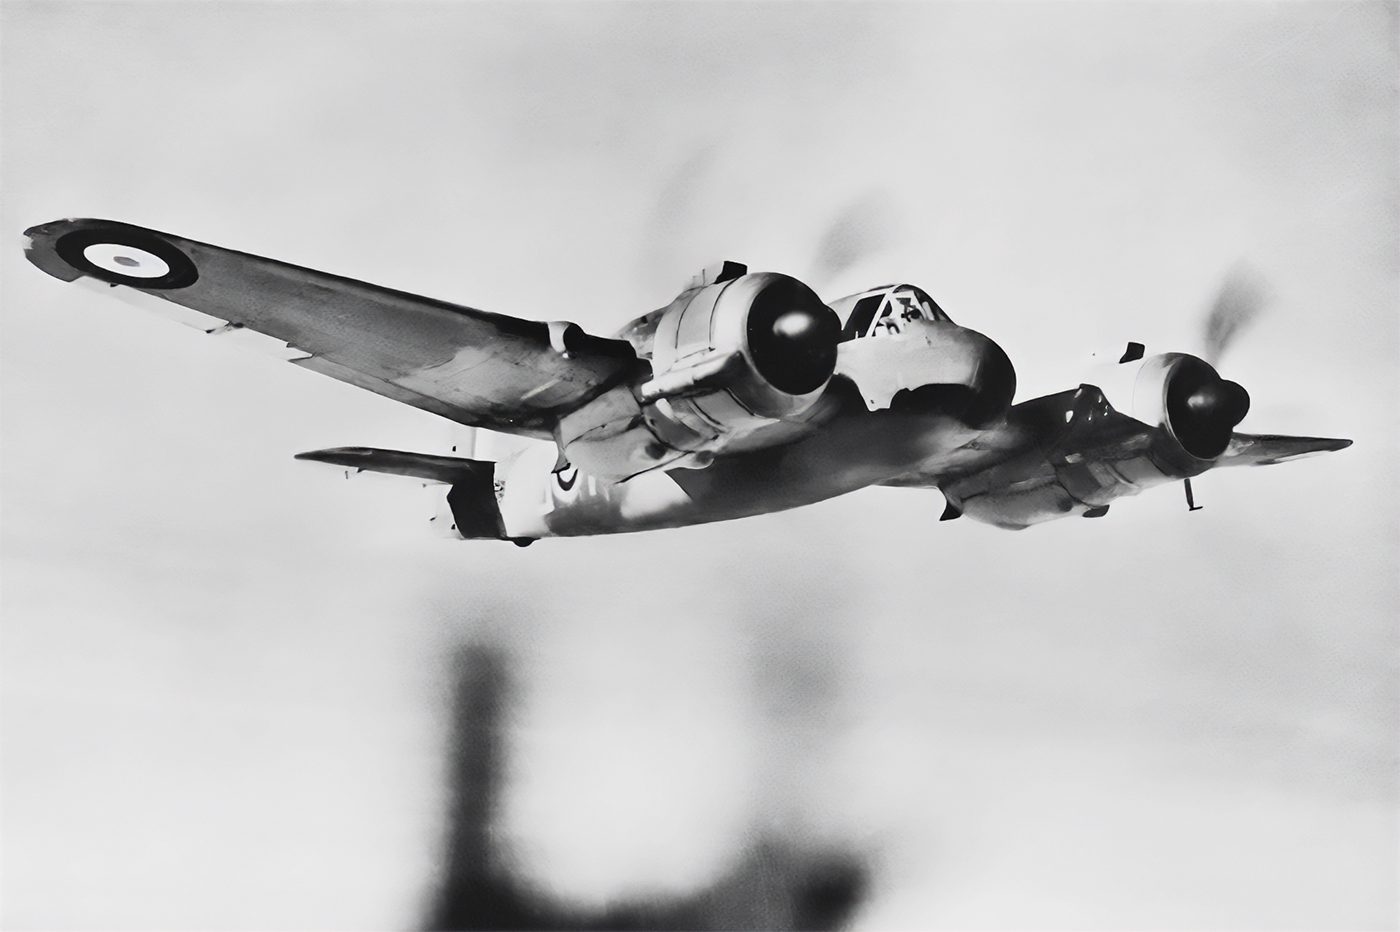 In this image, we see a Bristol Beaufighter in flight. It arrived to late to make a impact on the Battle of Britain, but it proved its worth in other areas of the air war against Nazi Germany.